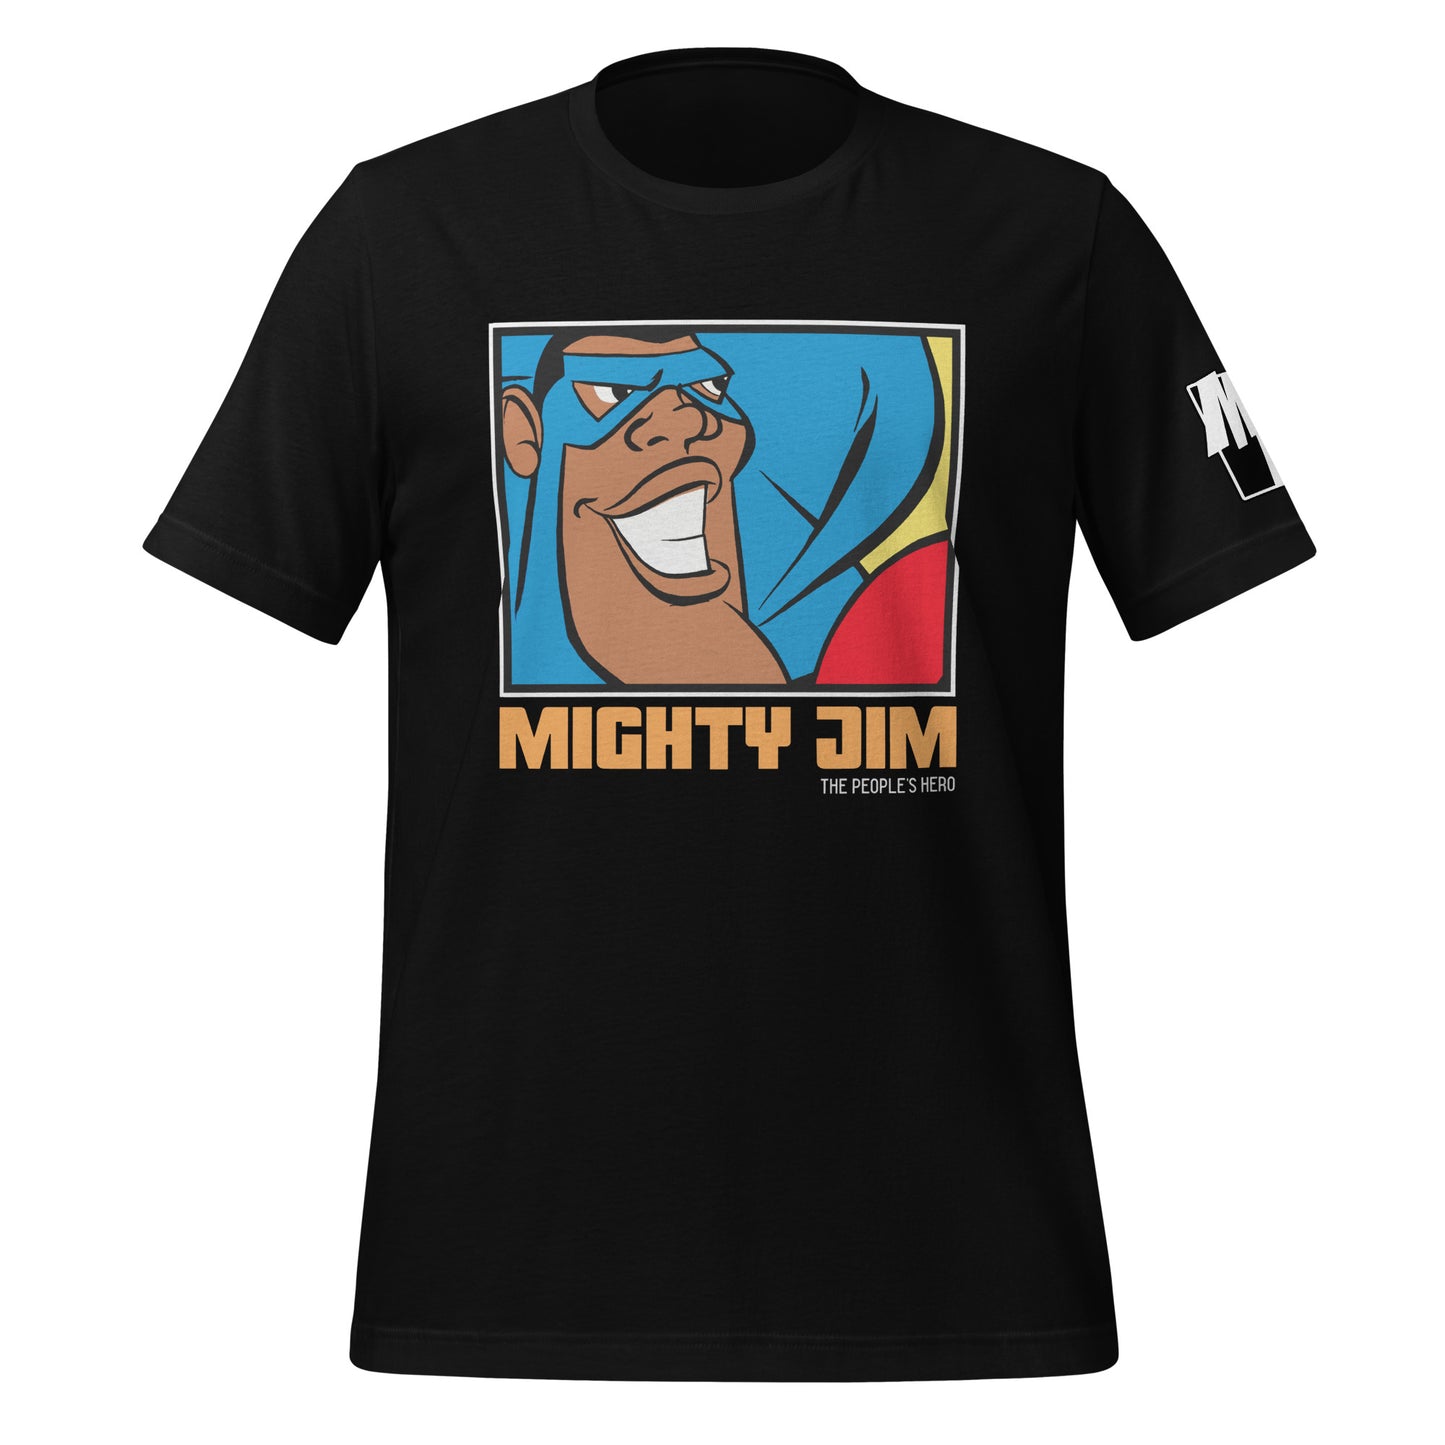 MIGHTY JIM (THE PEOPLE'S HERO) T-Shirt